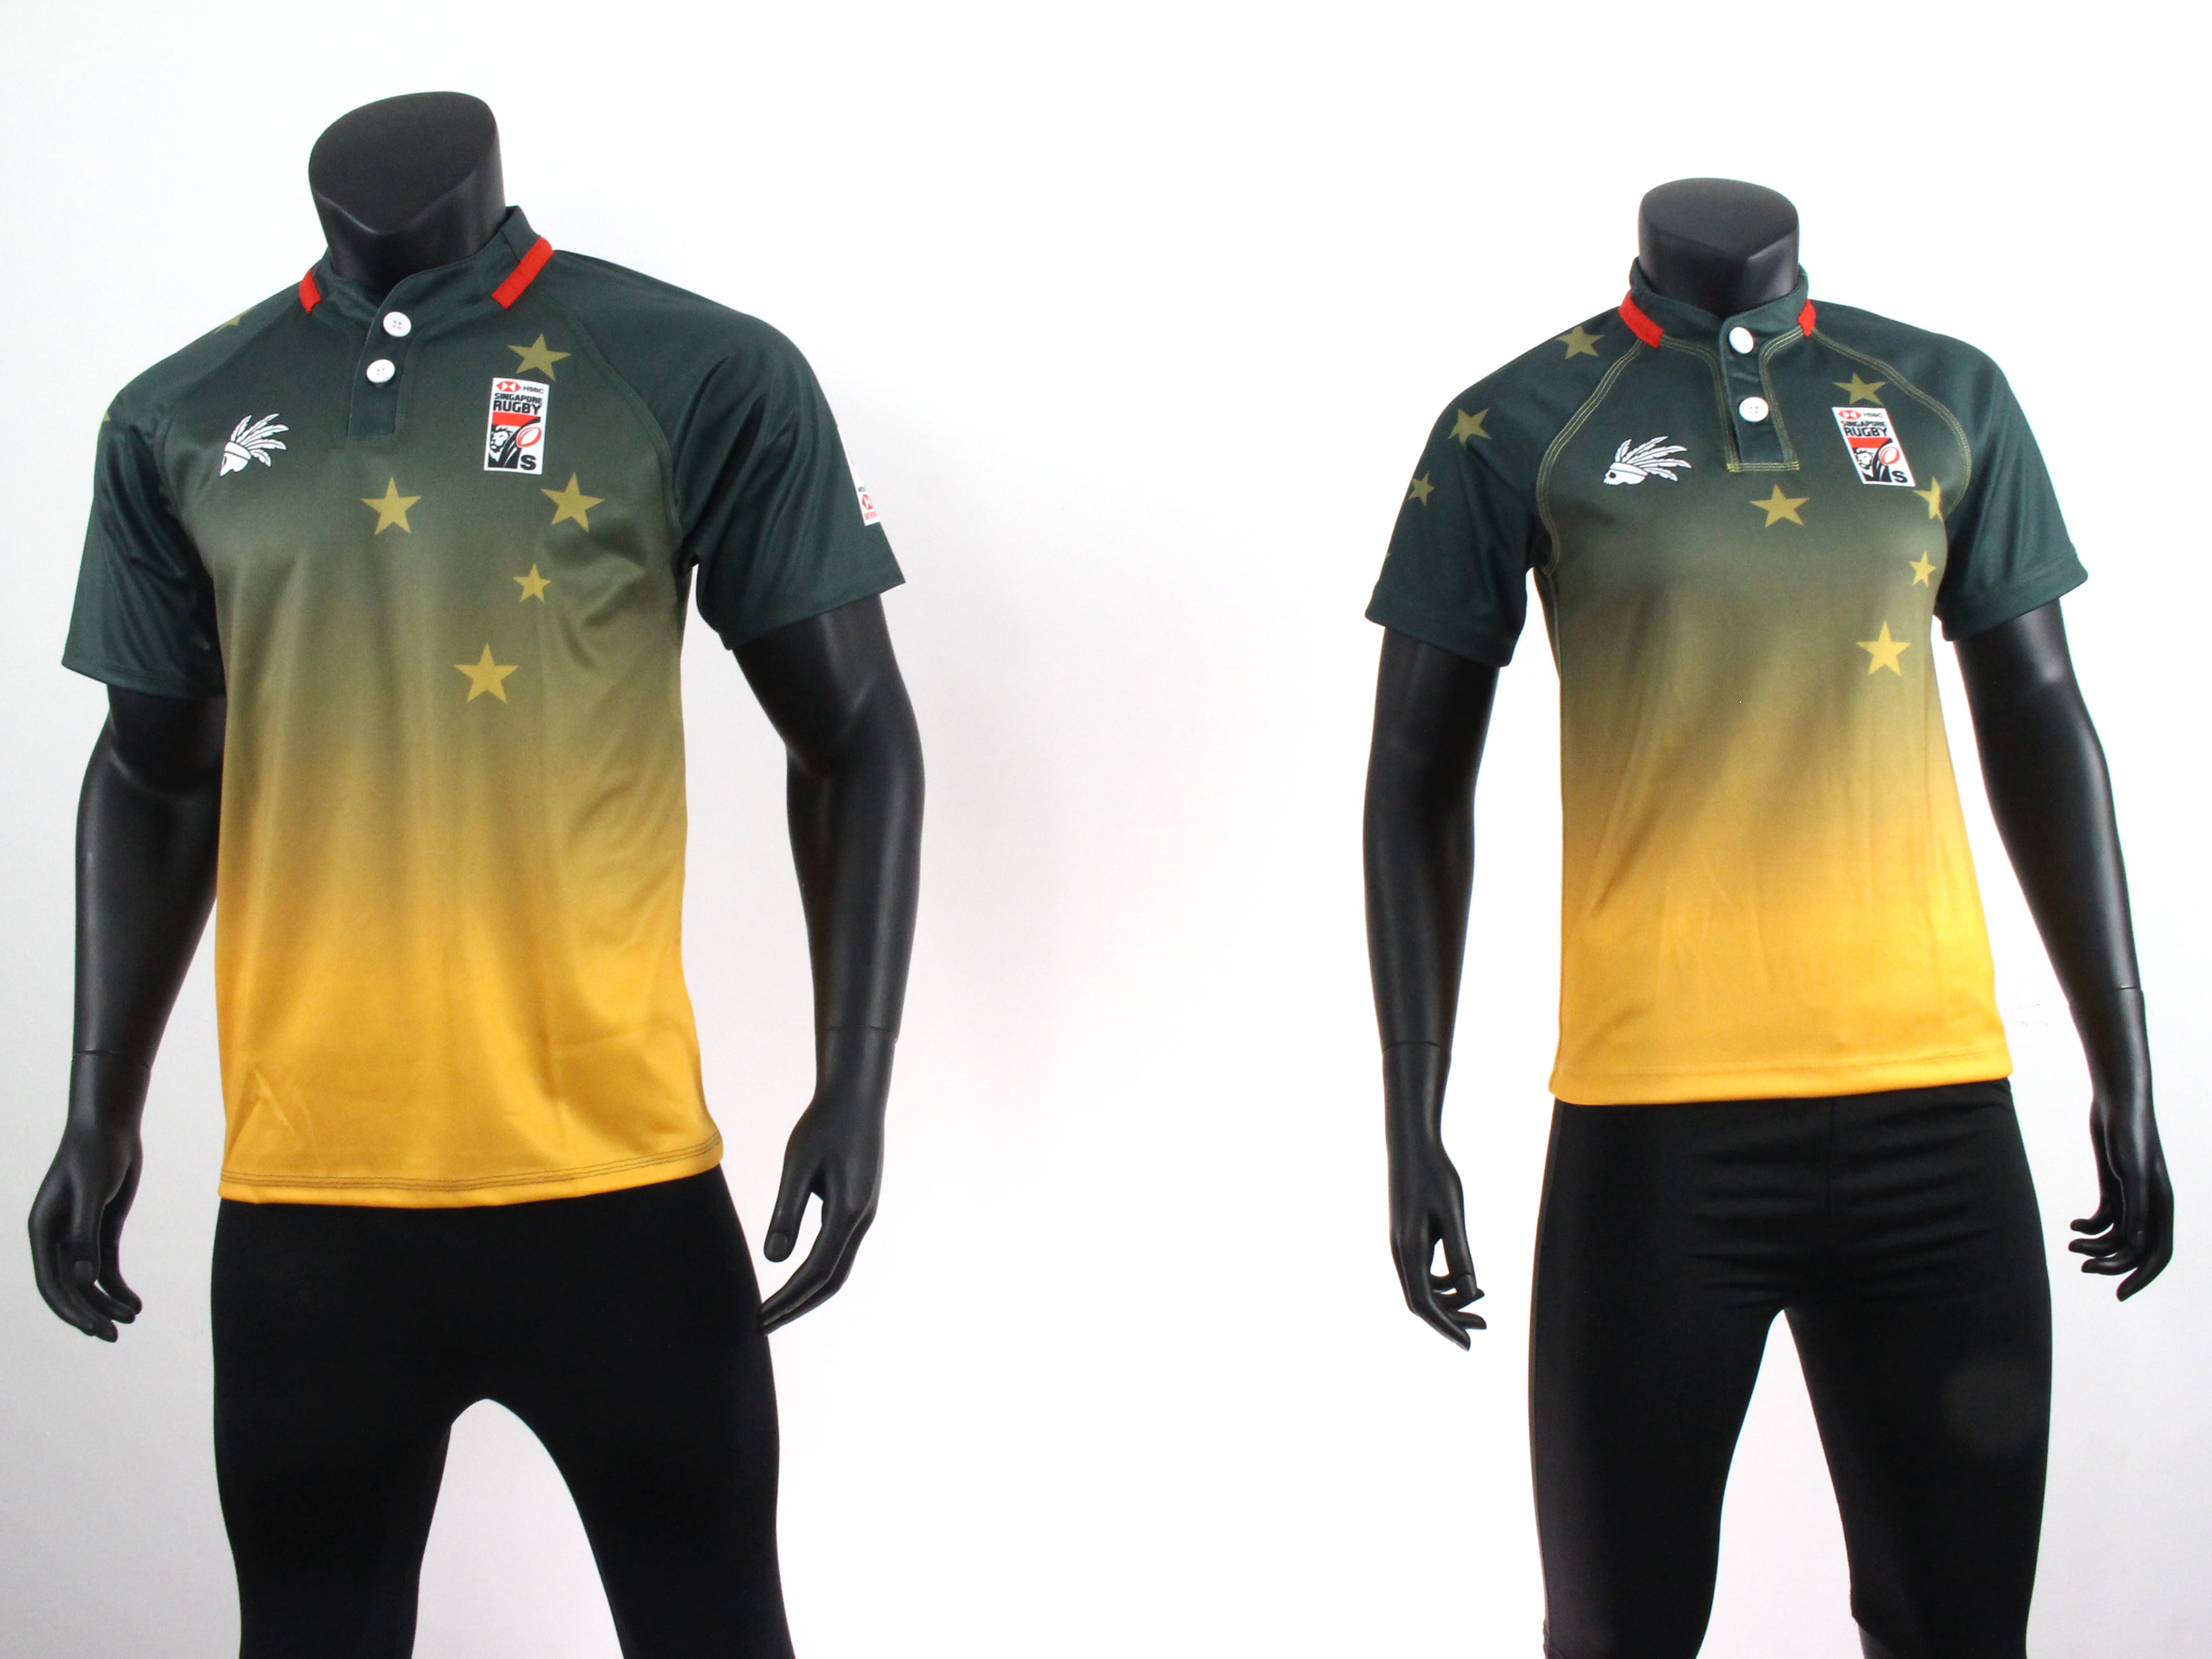 AUSTRALIA RUGBY JERSEY